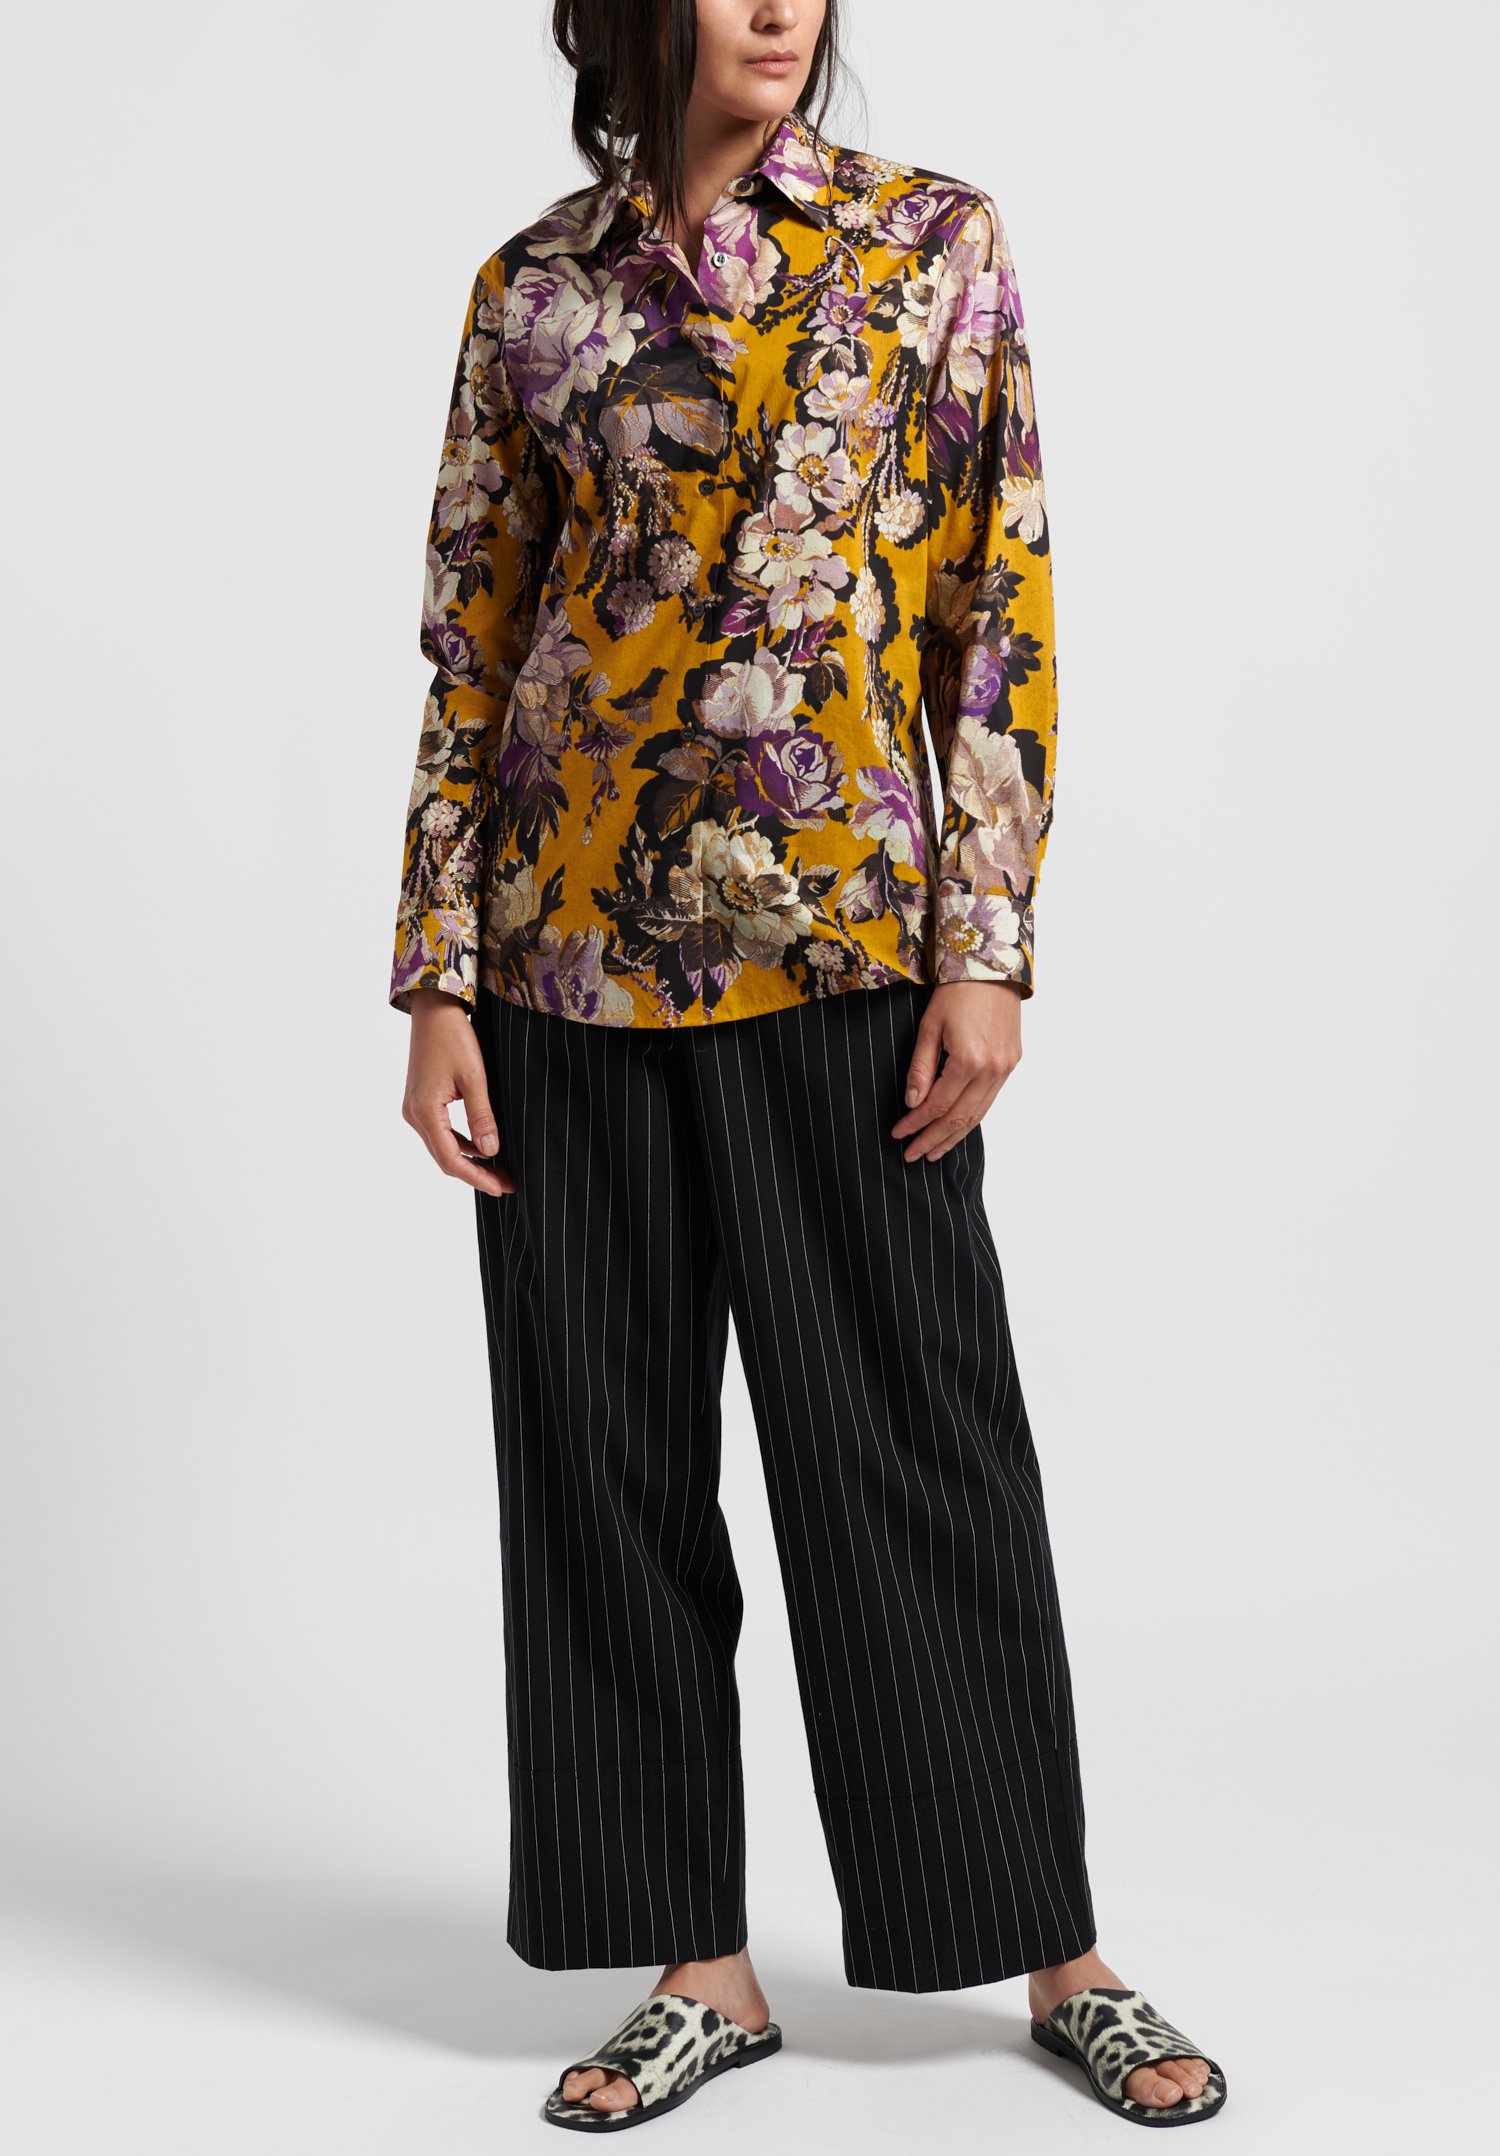 Dries Van Noten Clavelly Shirt in Yellow Floral | Santa Fe Dry Goods